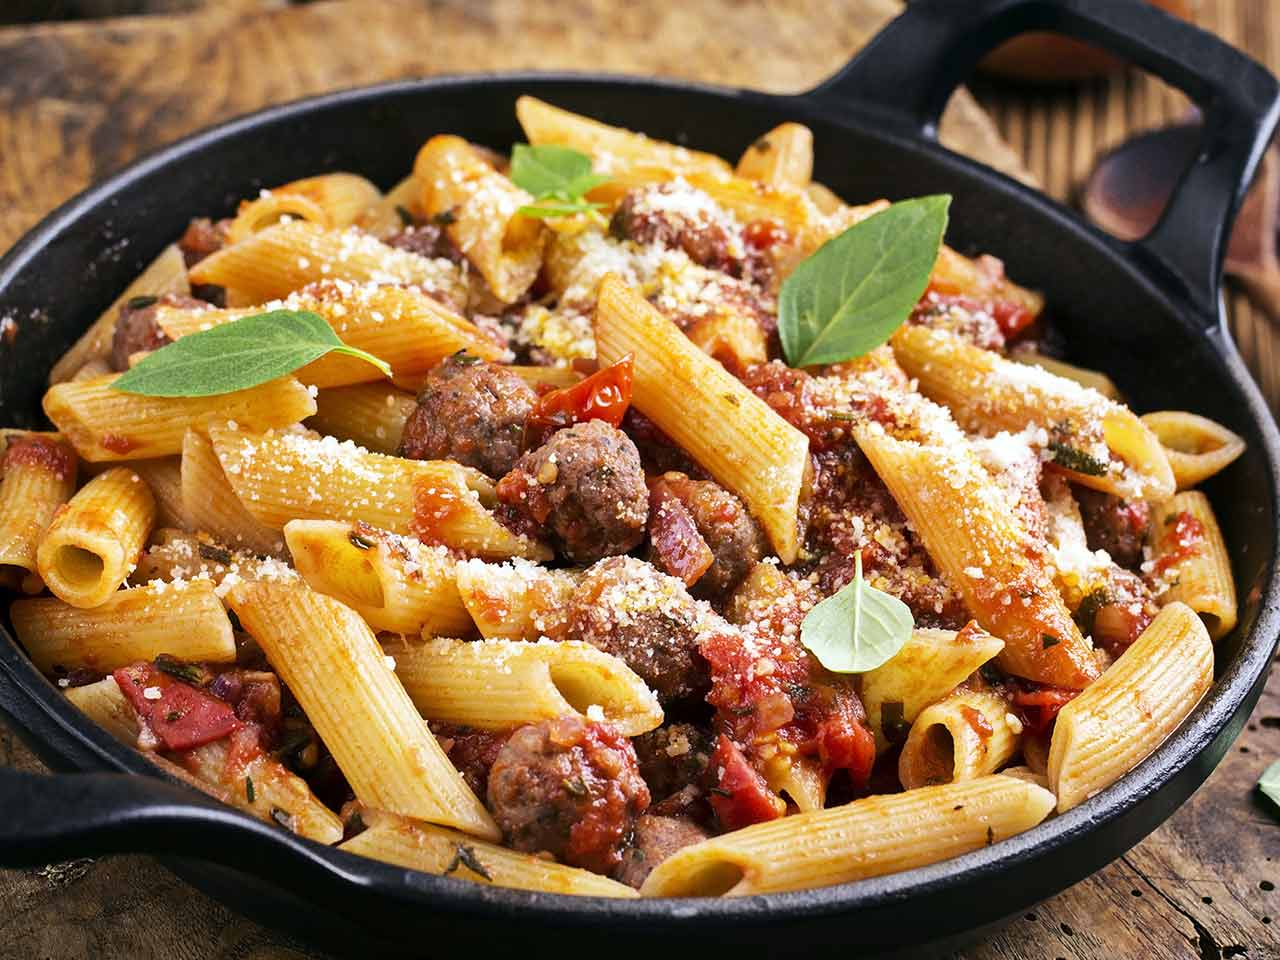 Italian sausage with penne